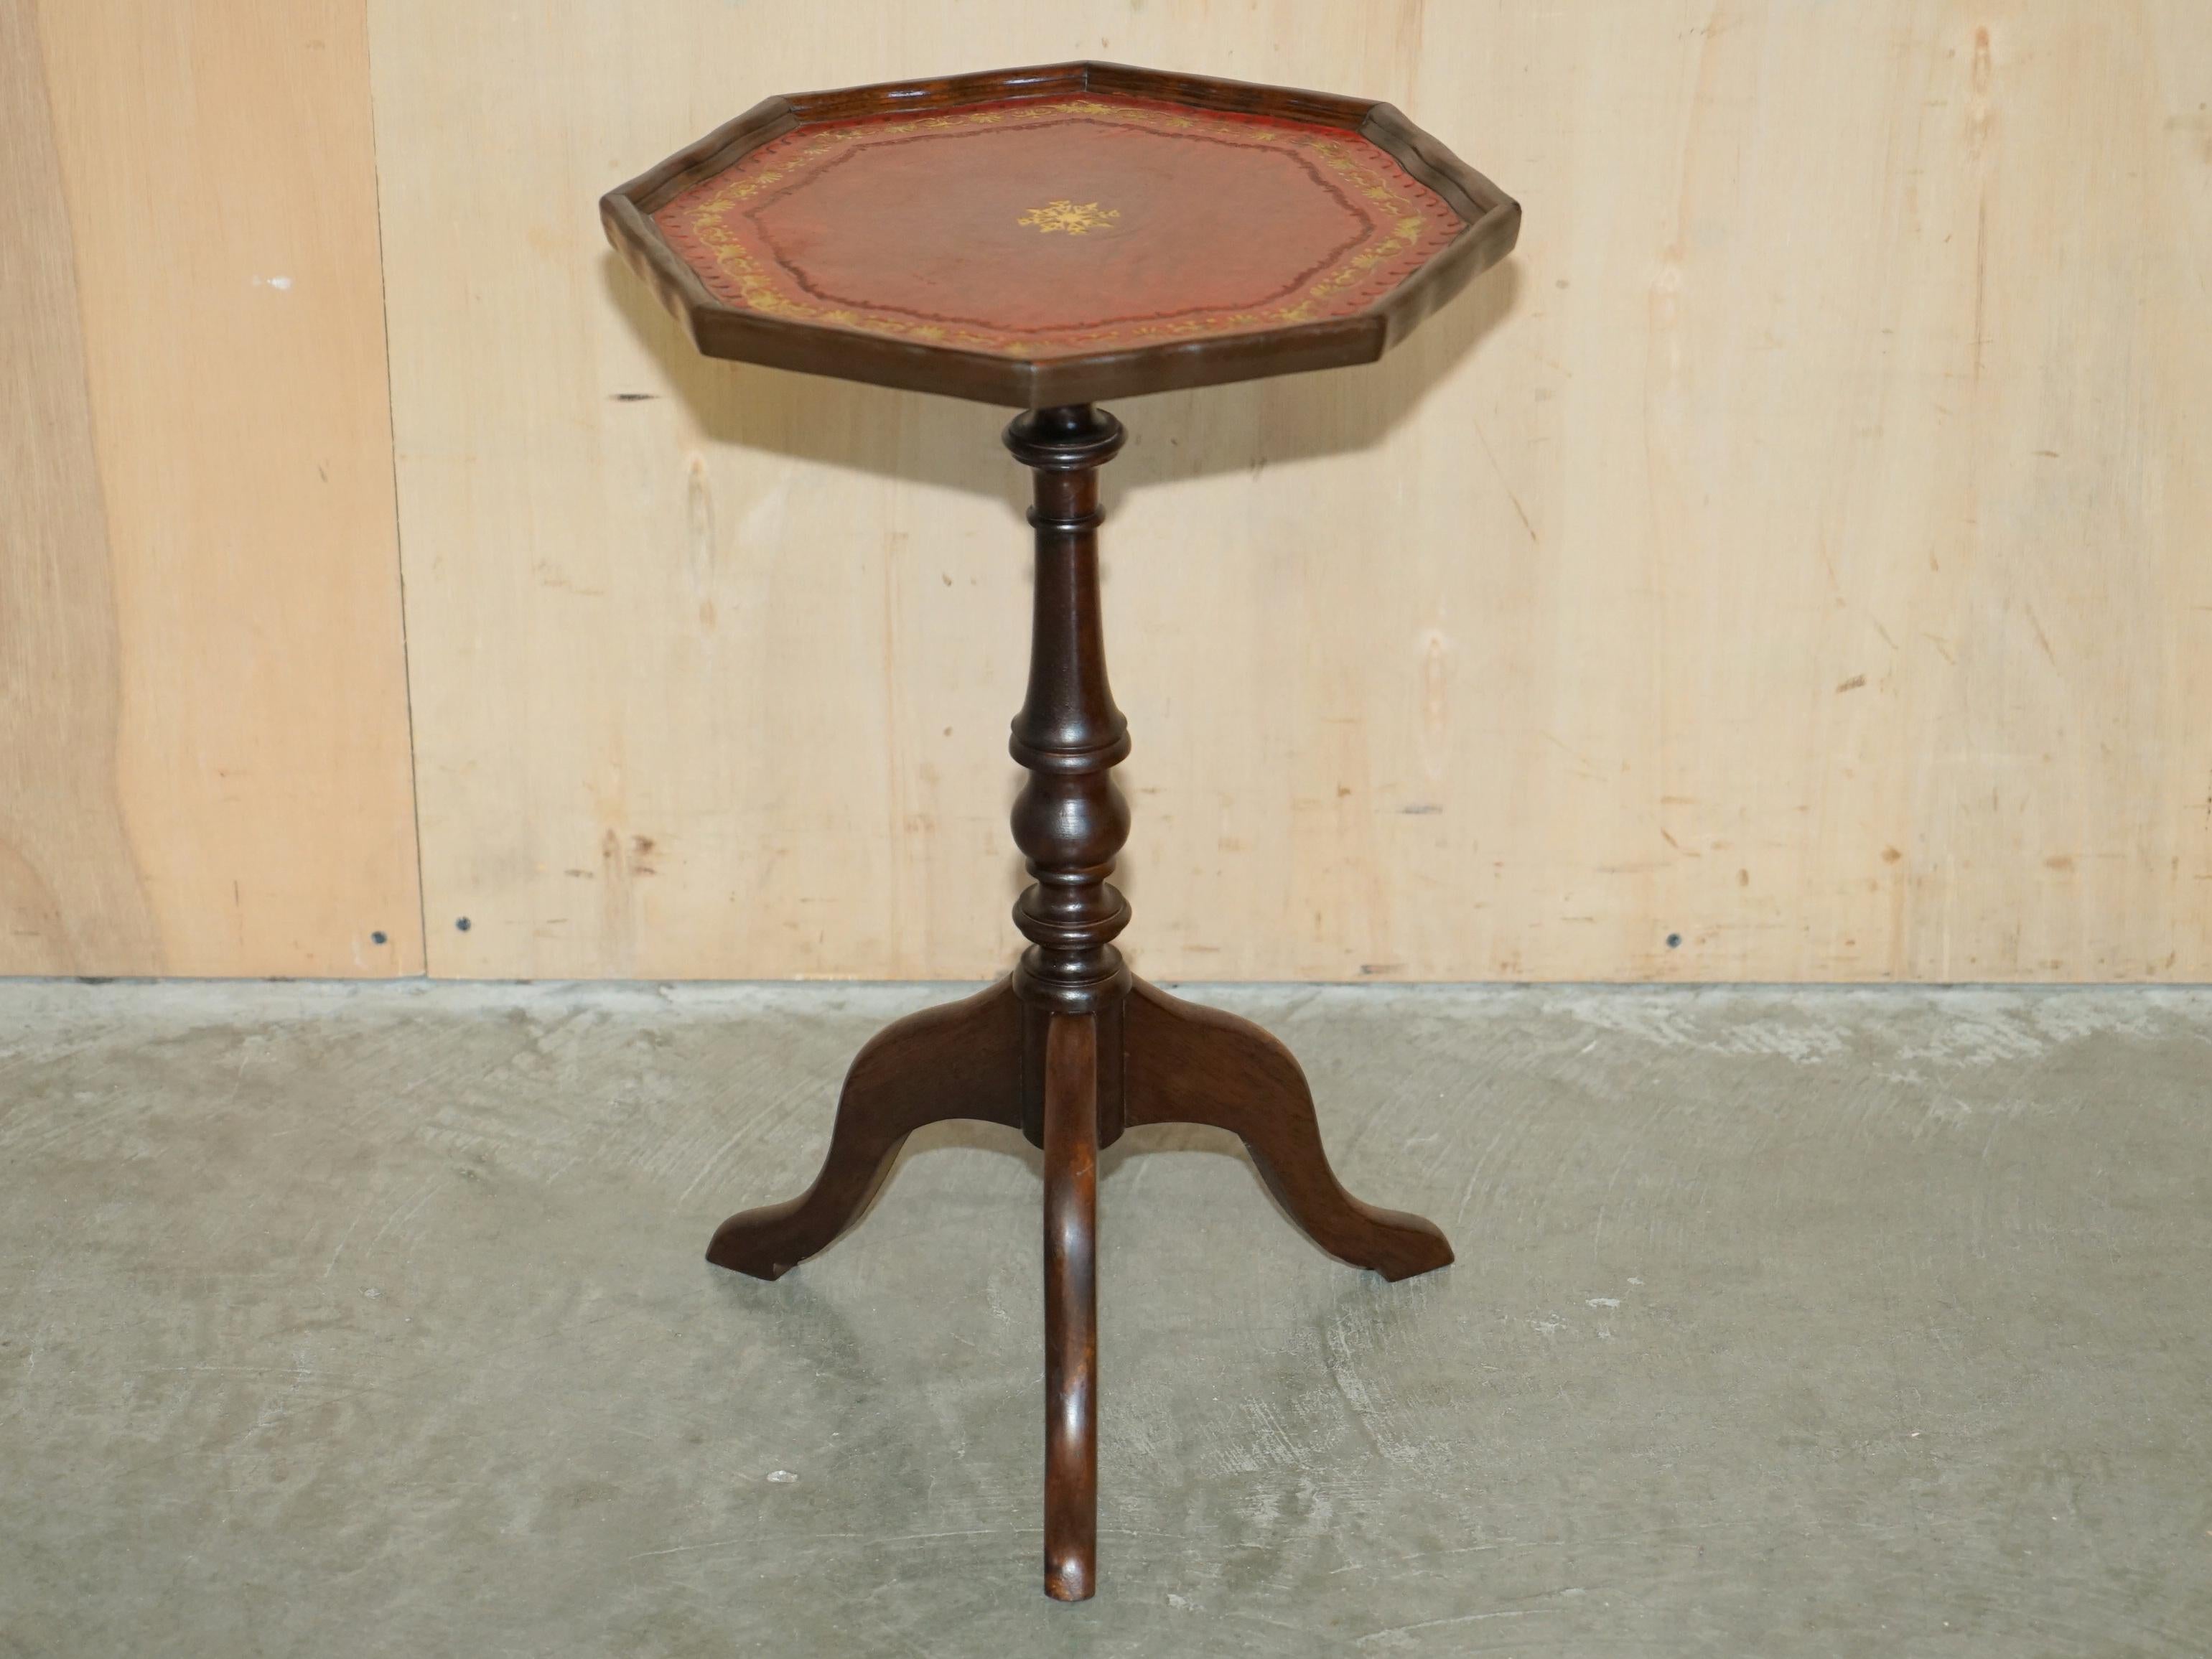 Royal House Antiques

Royal House Antiques is delighted to offer for sale this lovely gold leaf embossed leather tripod side end table. 

Please note the delivery fee listed is just a guide, it covers within the M25 only for the UK and local Europe